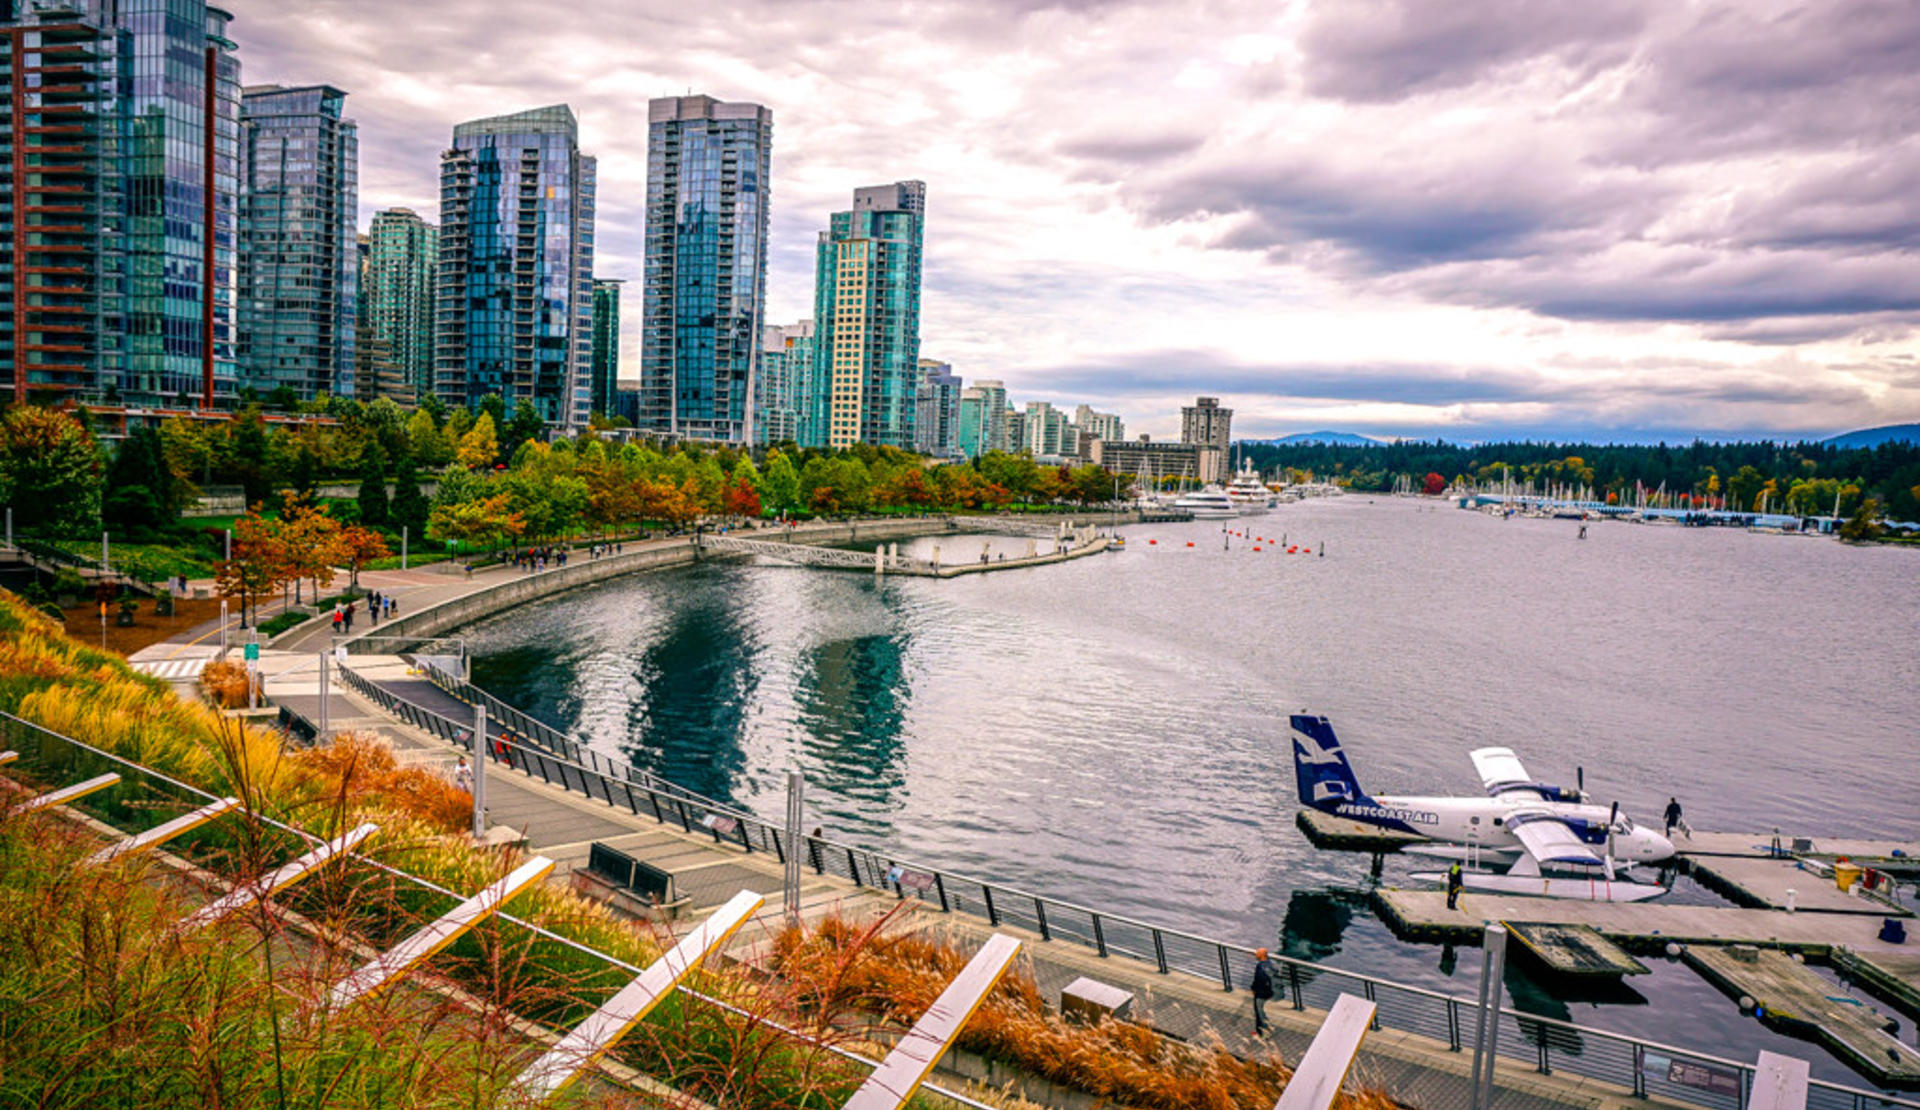 Why visit Vancouver reasons to visit Vancouver BC Canada